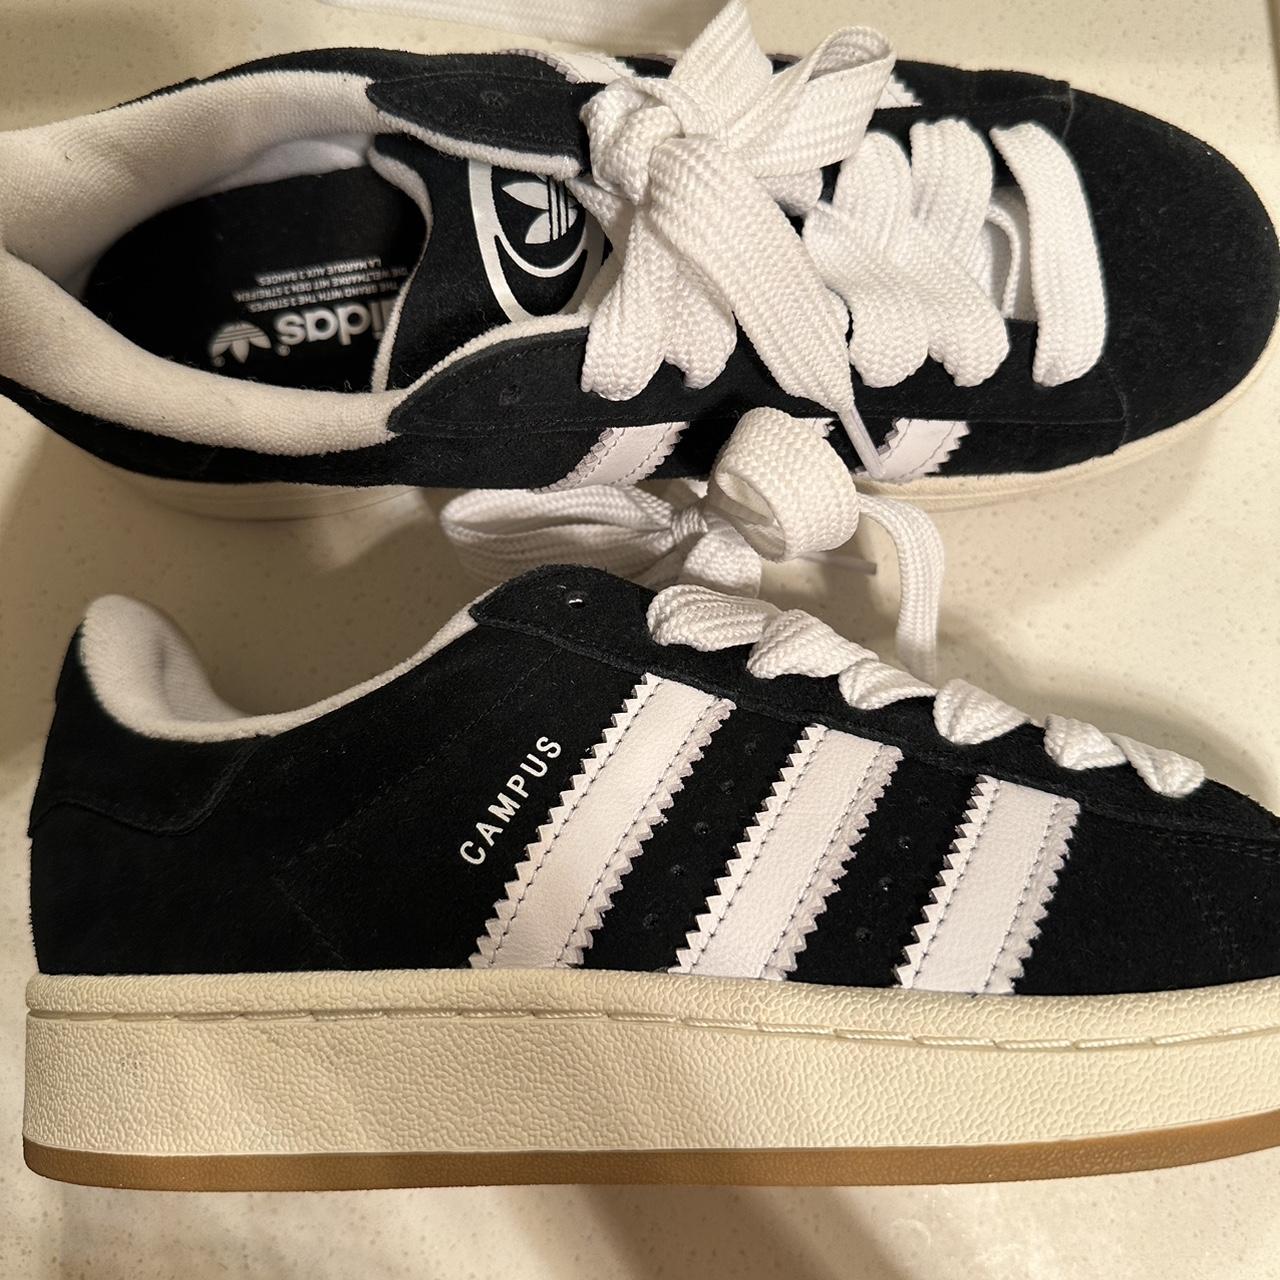 BNWT CAMPUS ADIDAS SHOES never worn, but without... - Depop